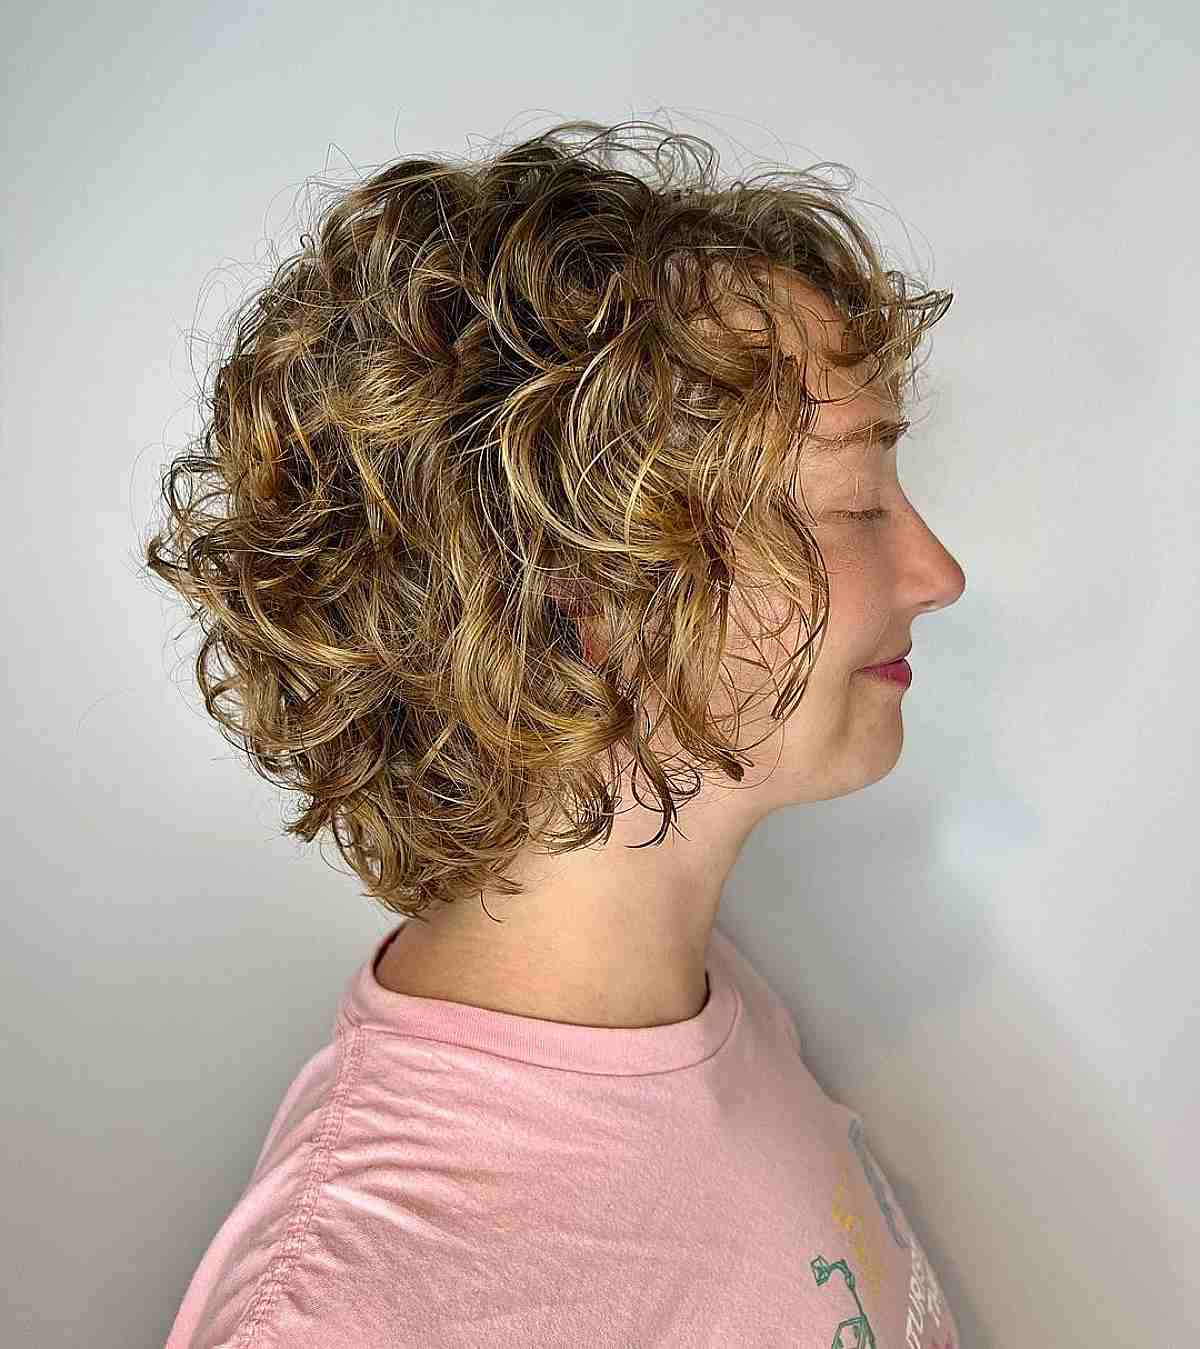 Effortless Short Tousled Curls with Subtle Bangs